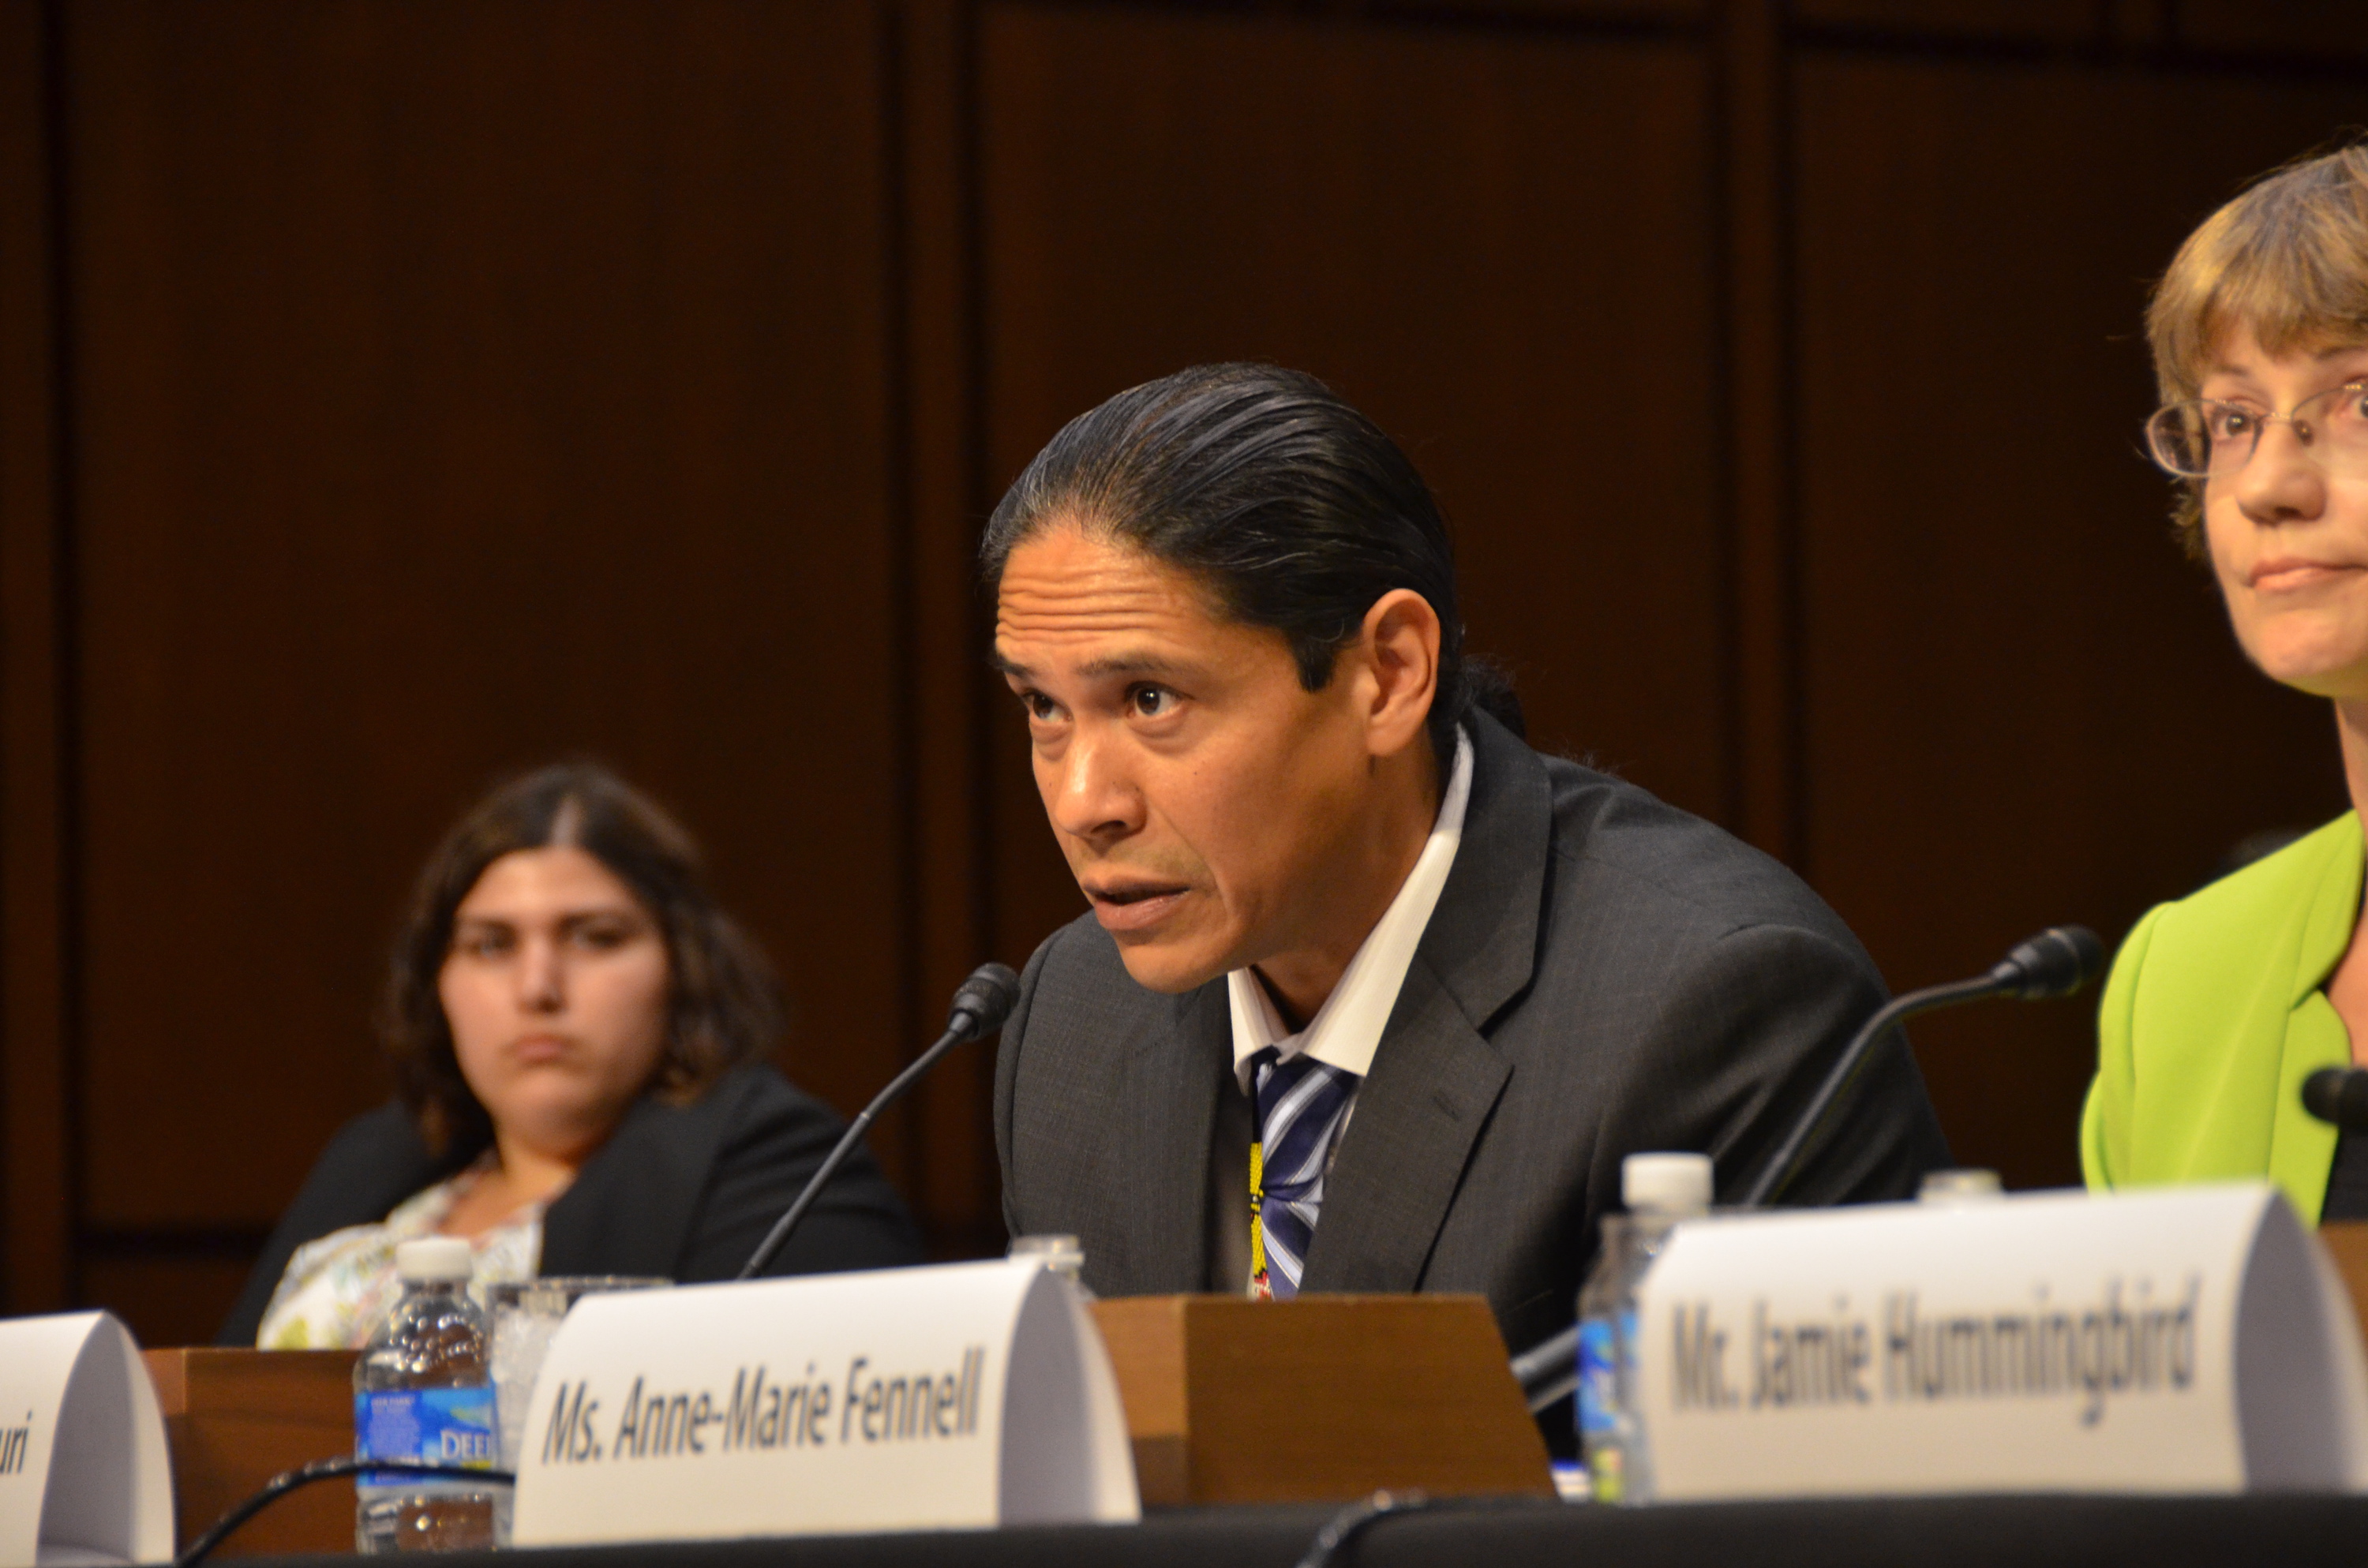 Senate Committee on Indian Affairs schedules hearing on tribal gaming industry